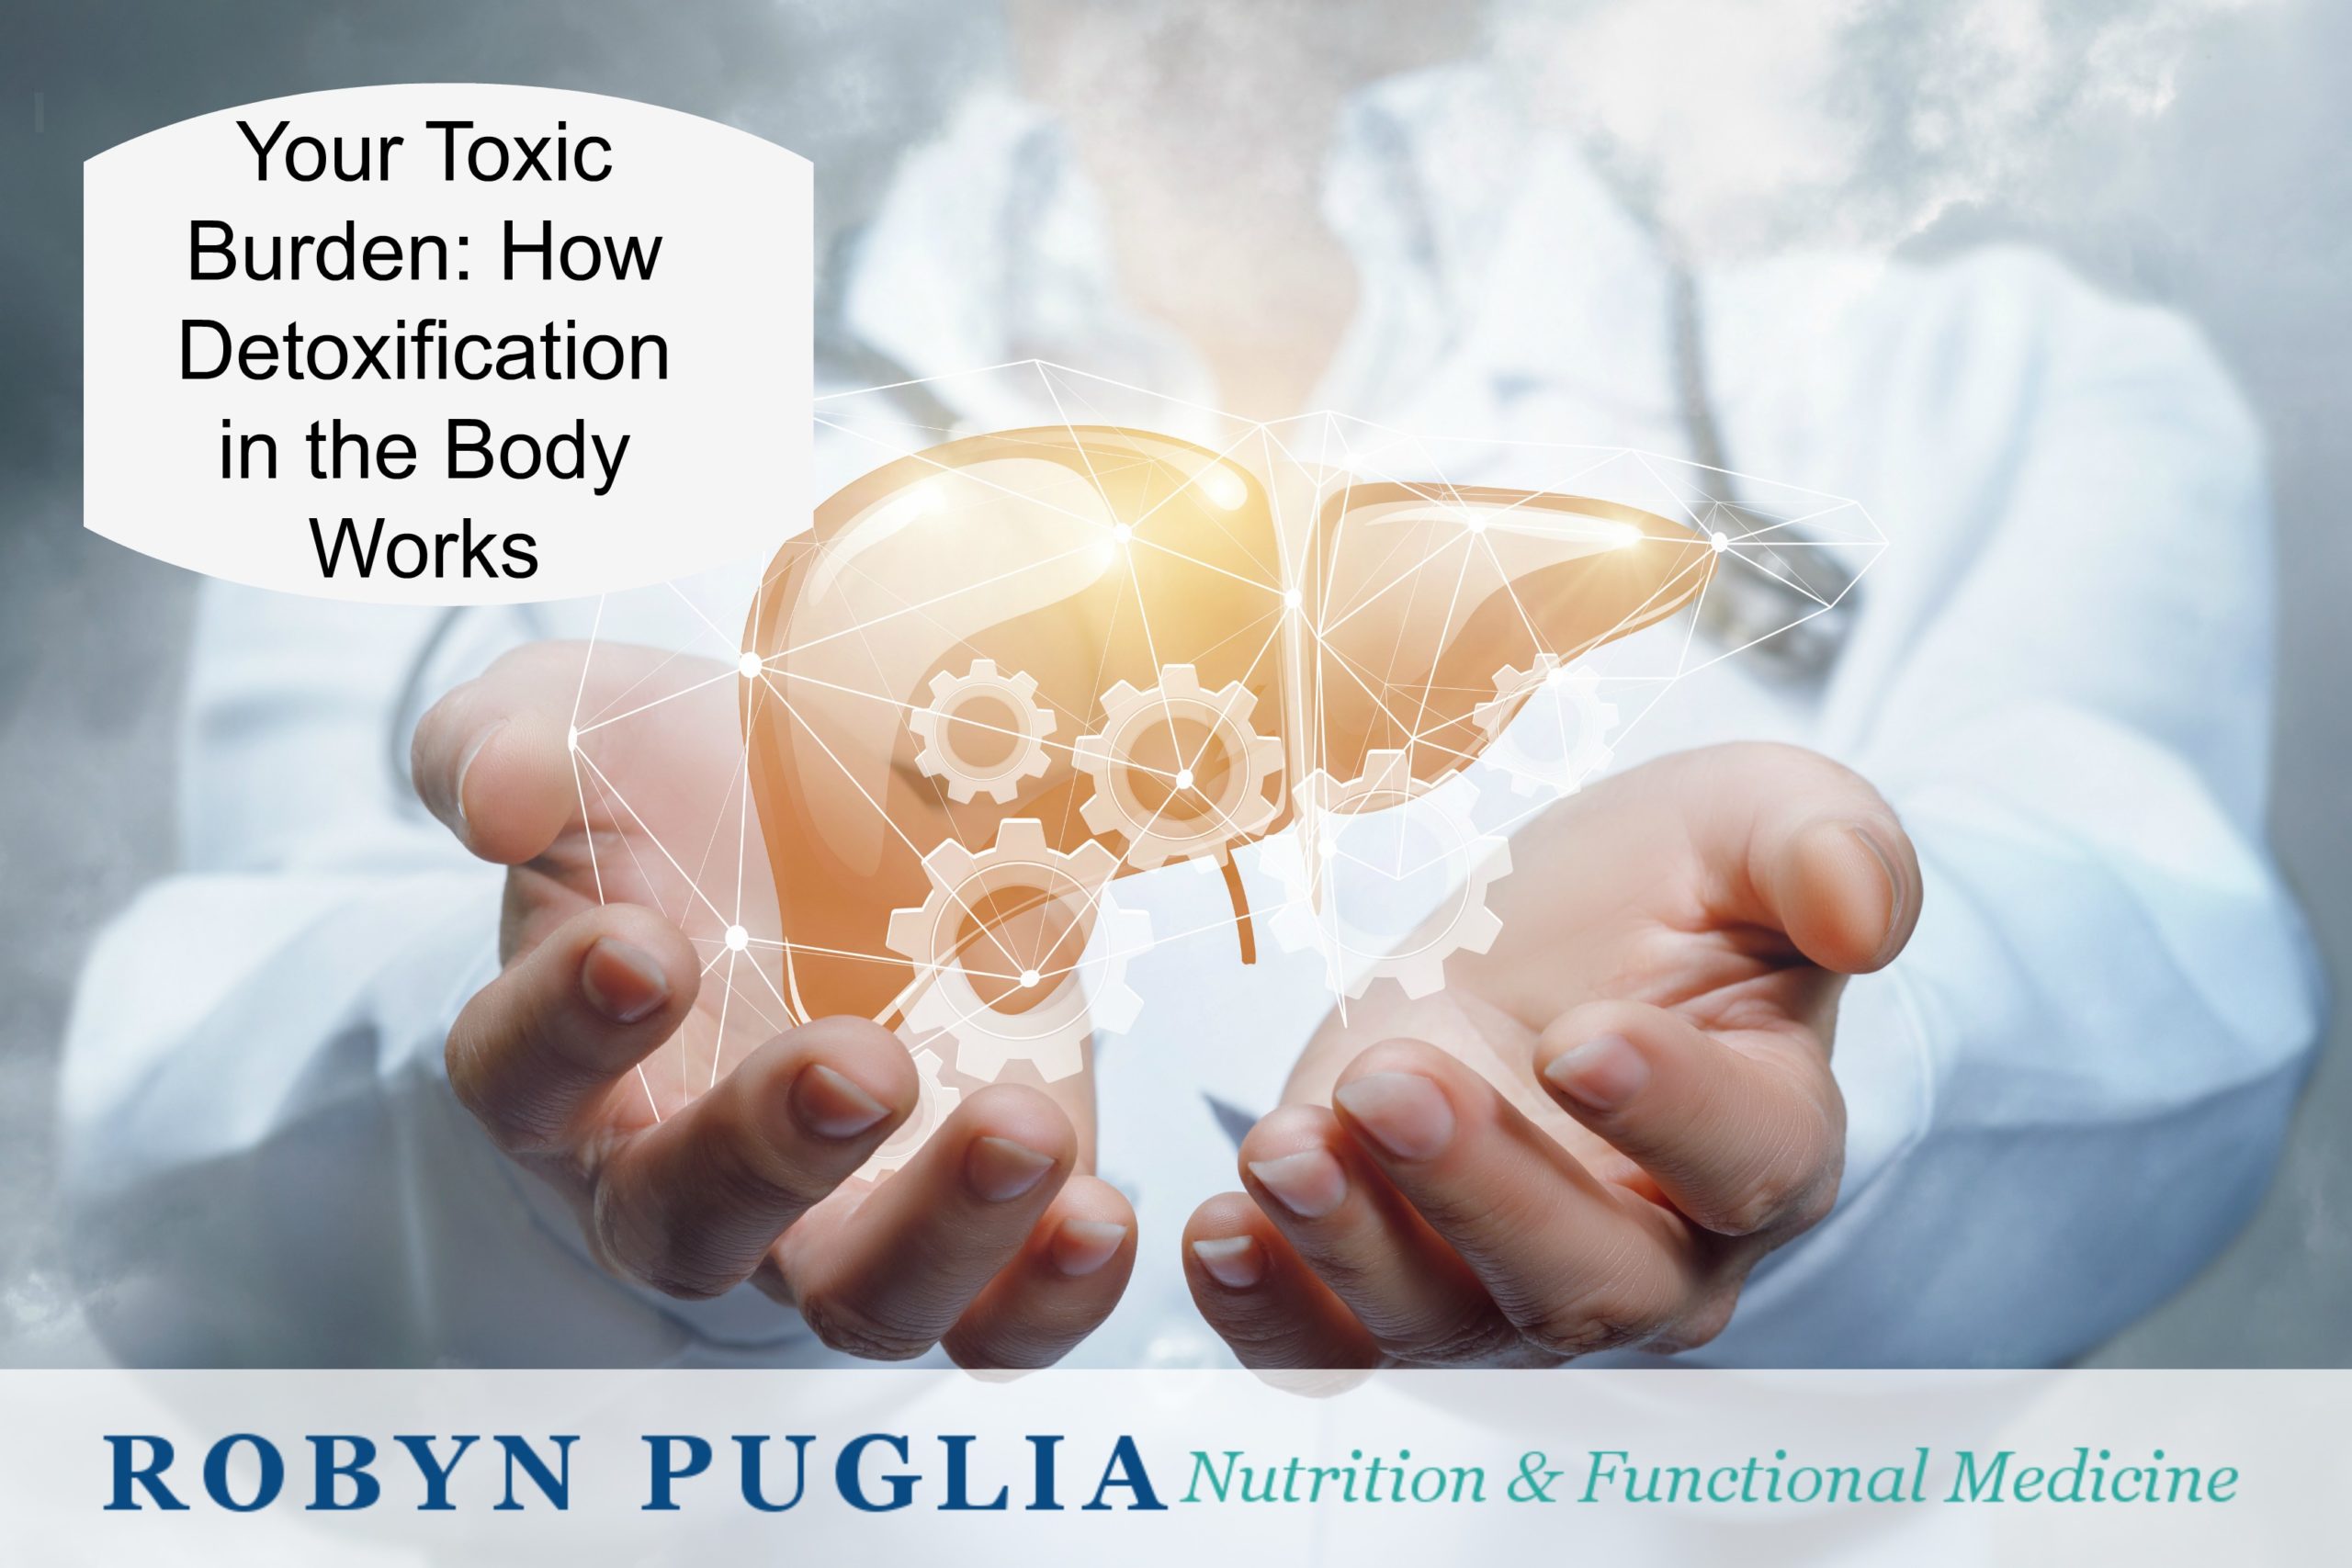 Your Toxic Burden: How Detoxification in the Body Works